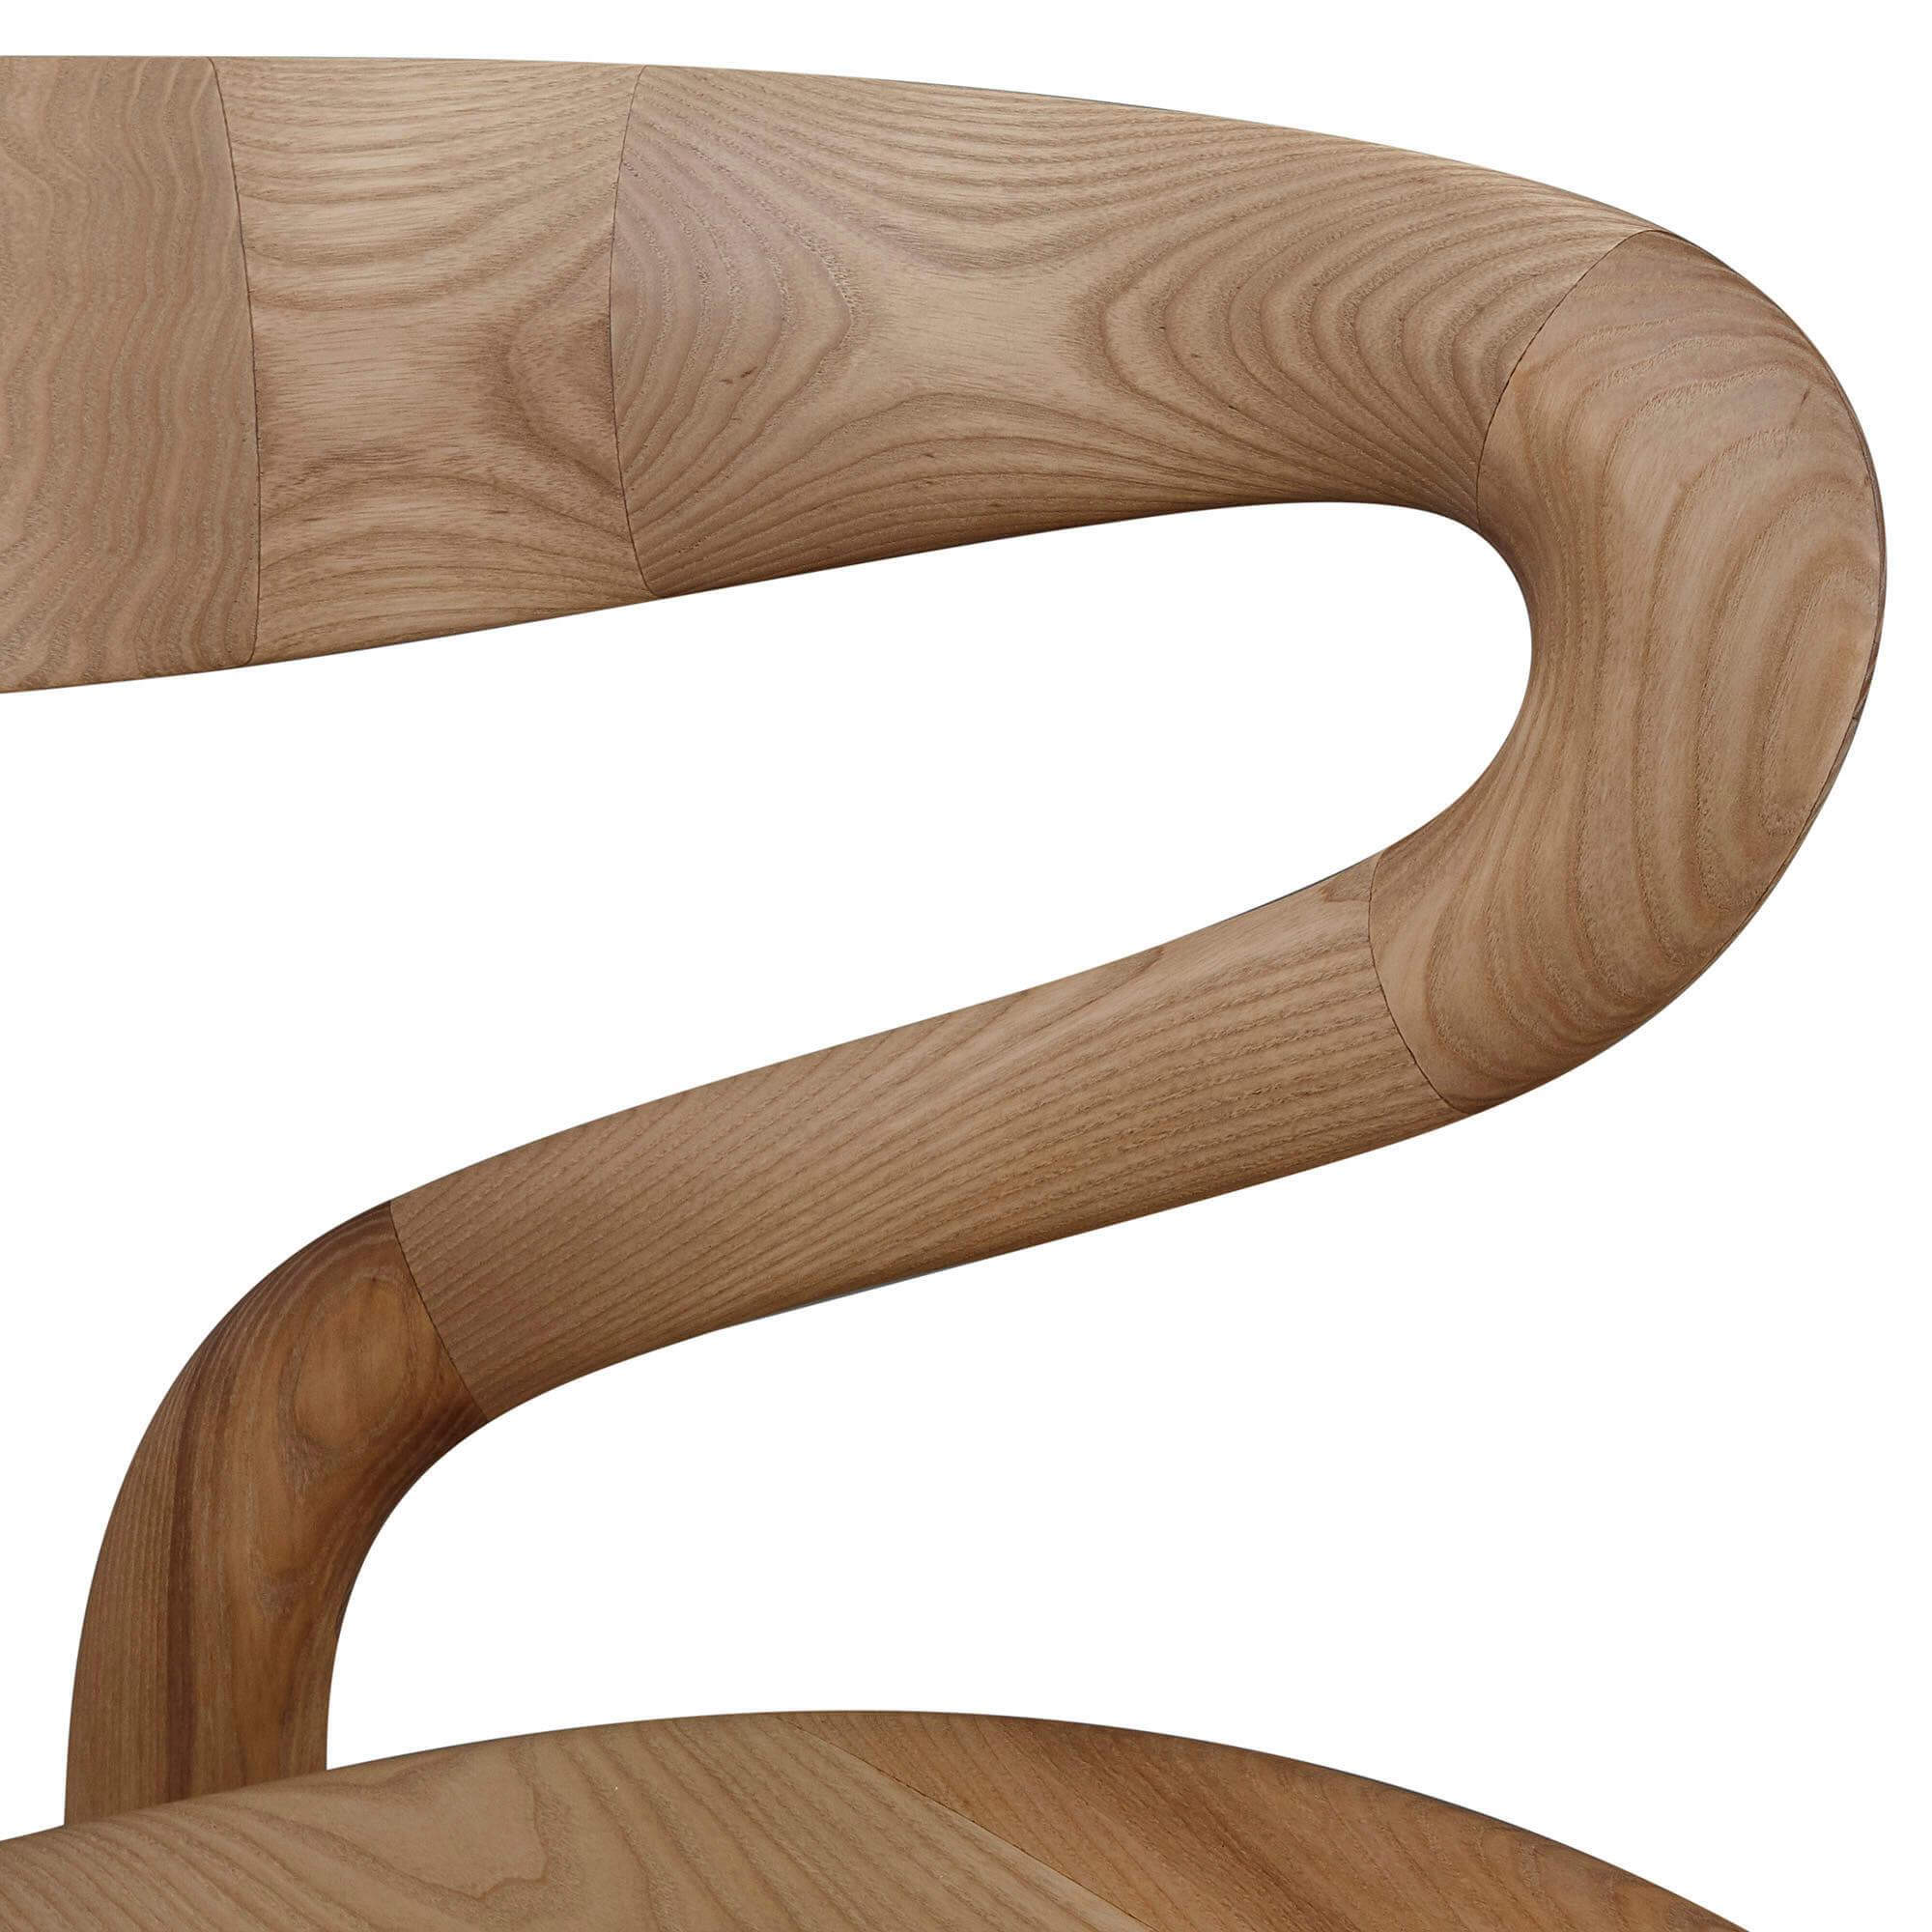 'S Chair', Contemporary Abstract Wooden Chair by Tom Vaughan 1